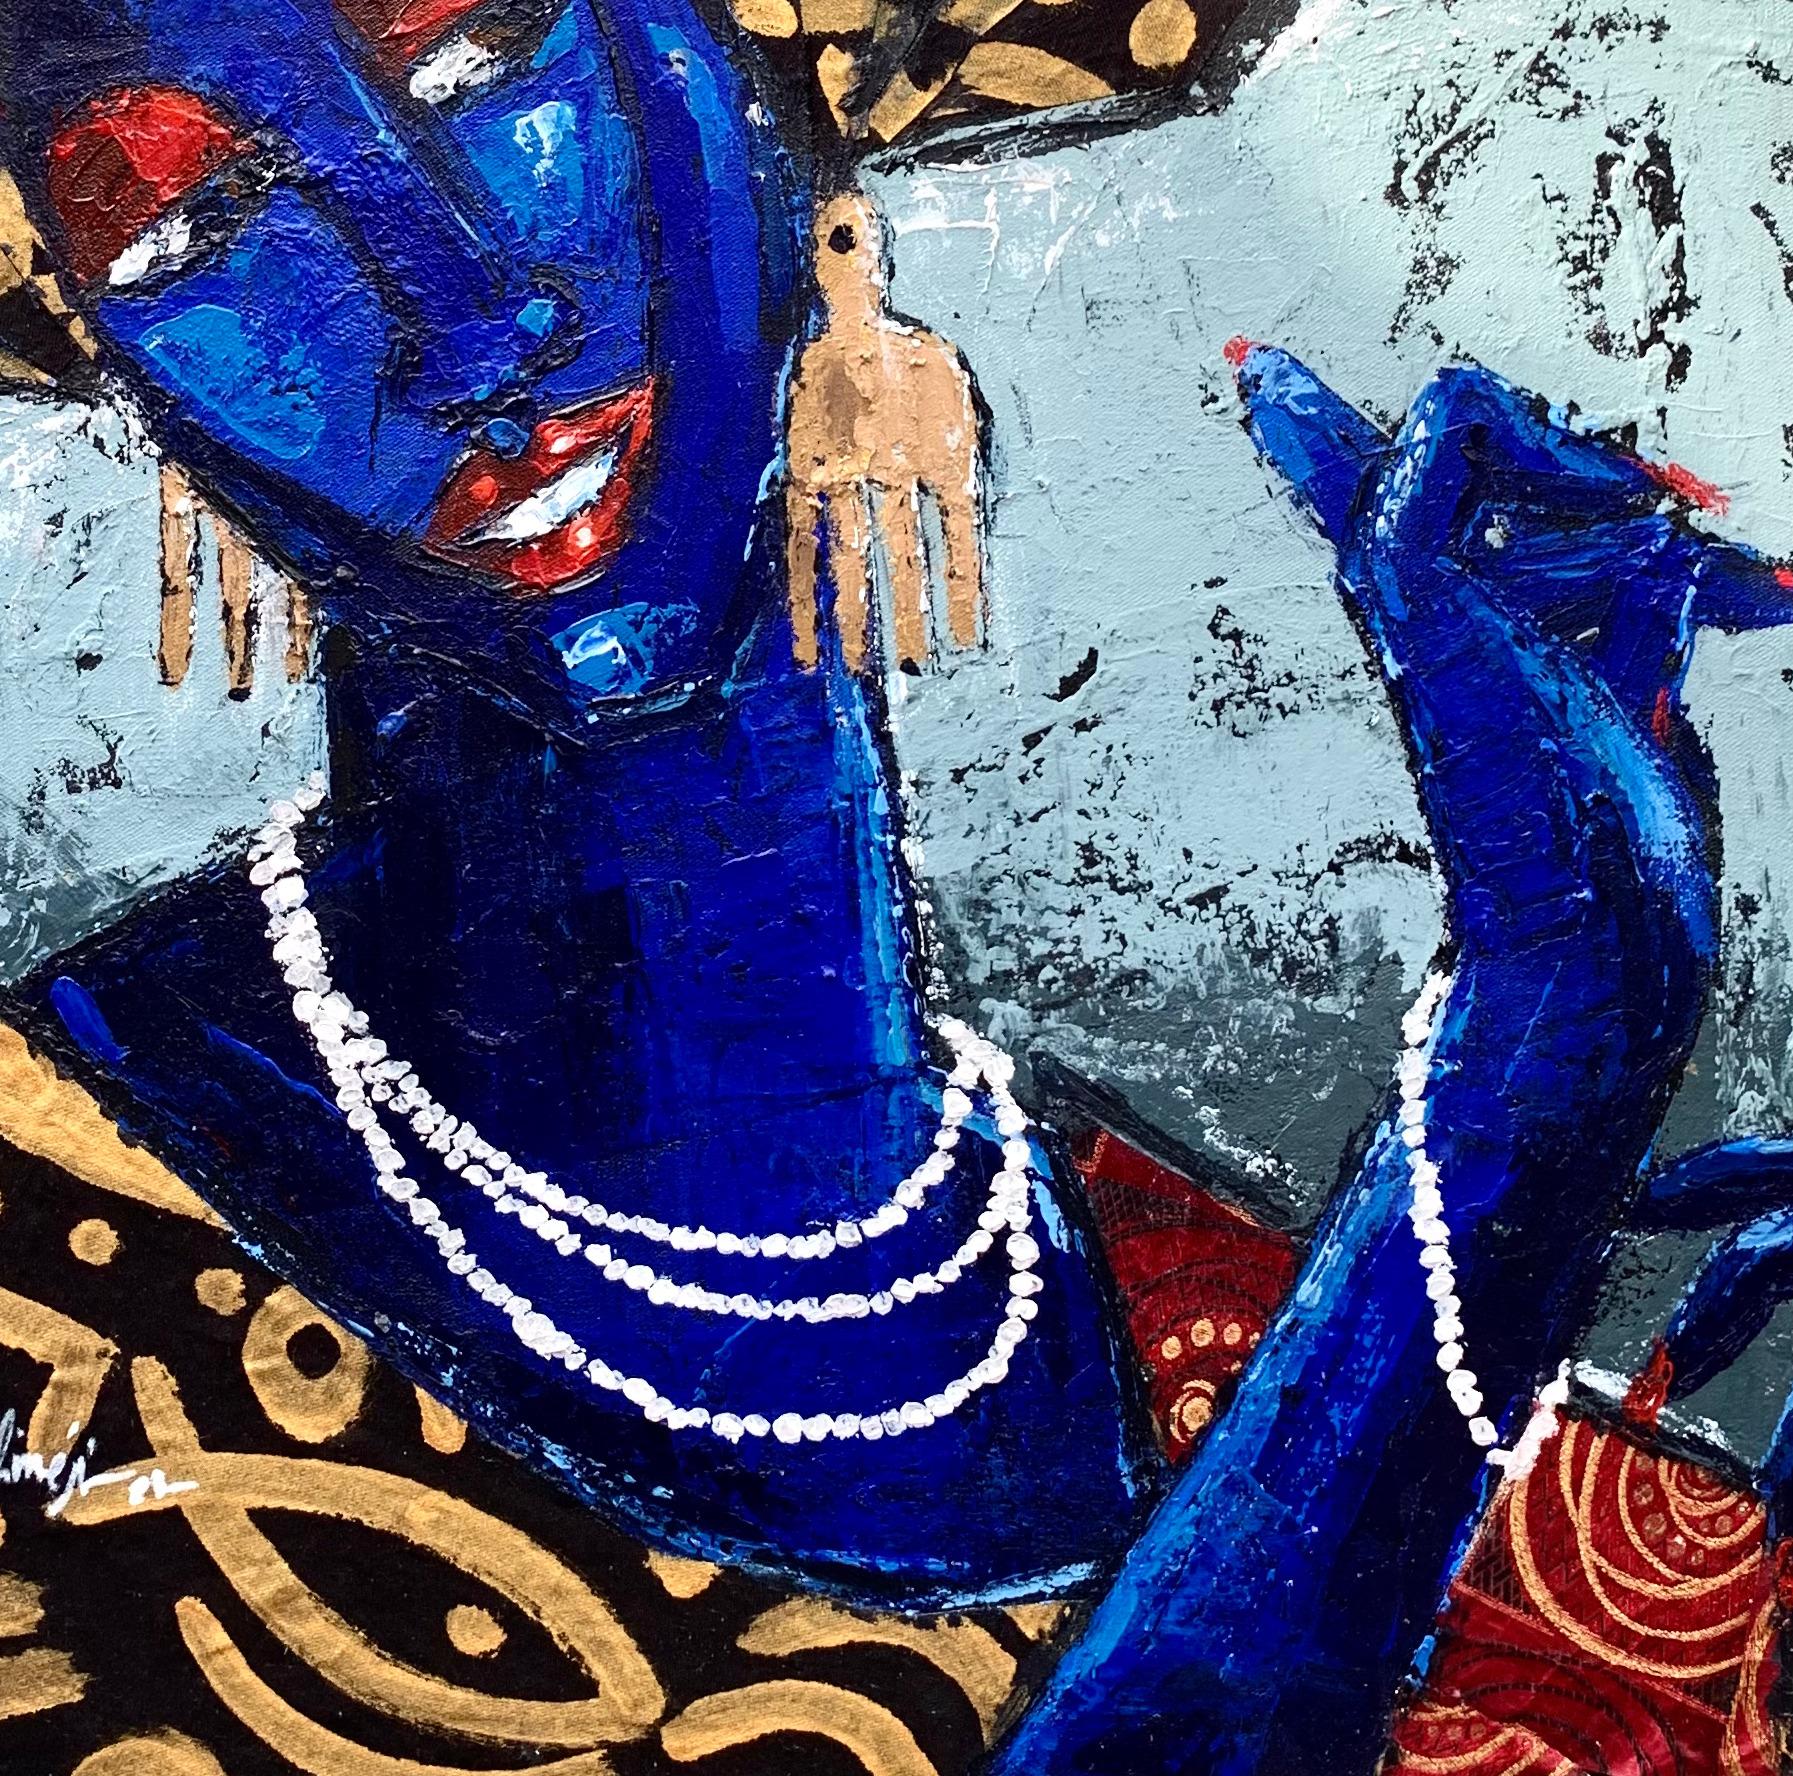 Obirin Asiko (Fashionable Woman) is an original painting by Oladimeji Alabi. Oladimeji created the Obirin Asiko (Fashionable Woman) with Mixed Media on a 21W by 24H inches primed canvas.

This painting is created to document the uniqueness of